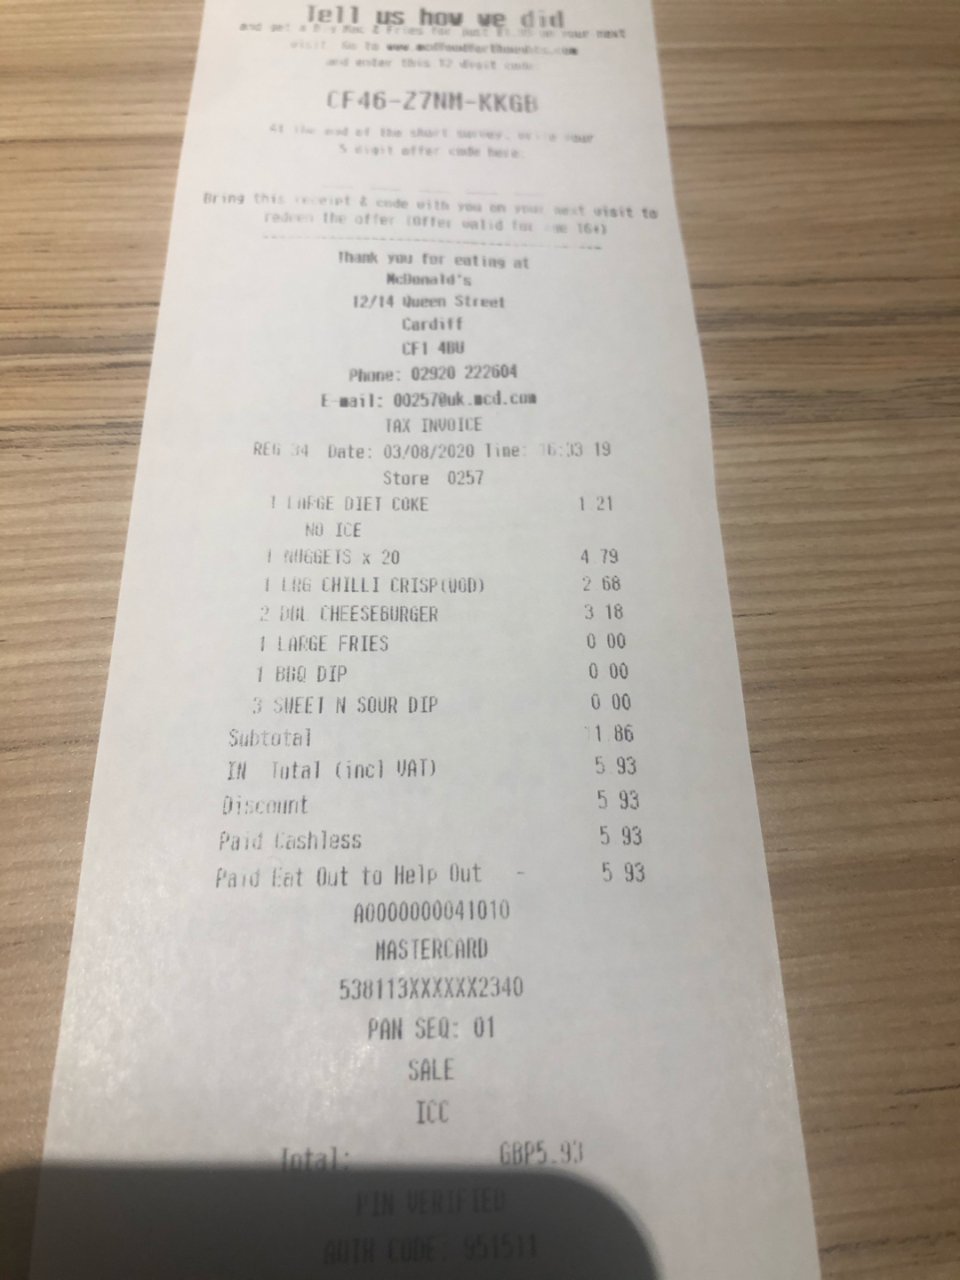 Eat out help out开放餐厅...